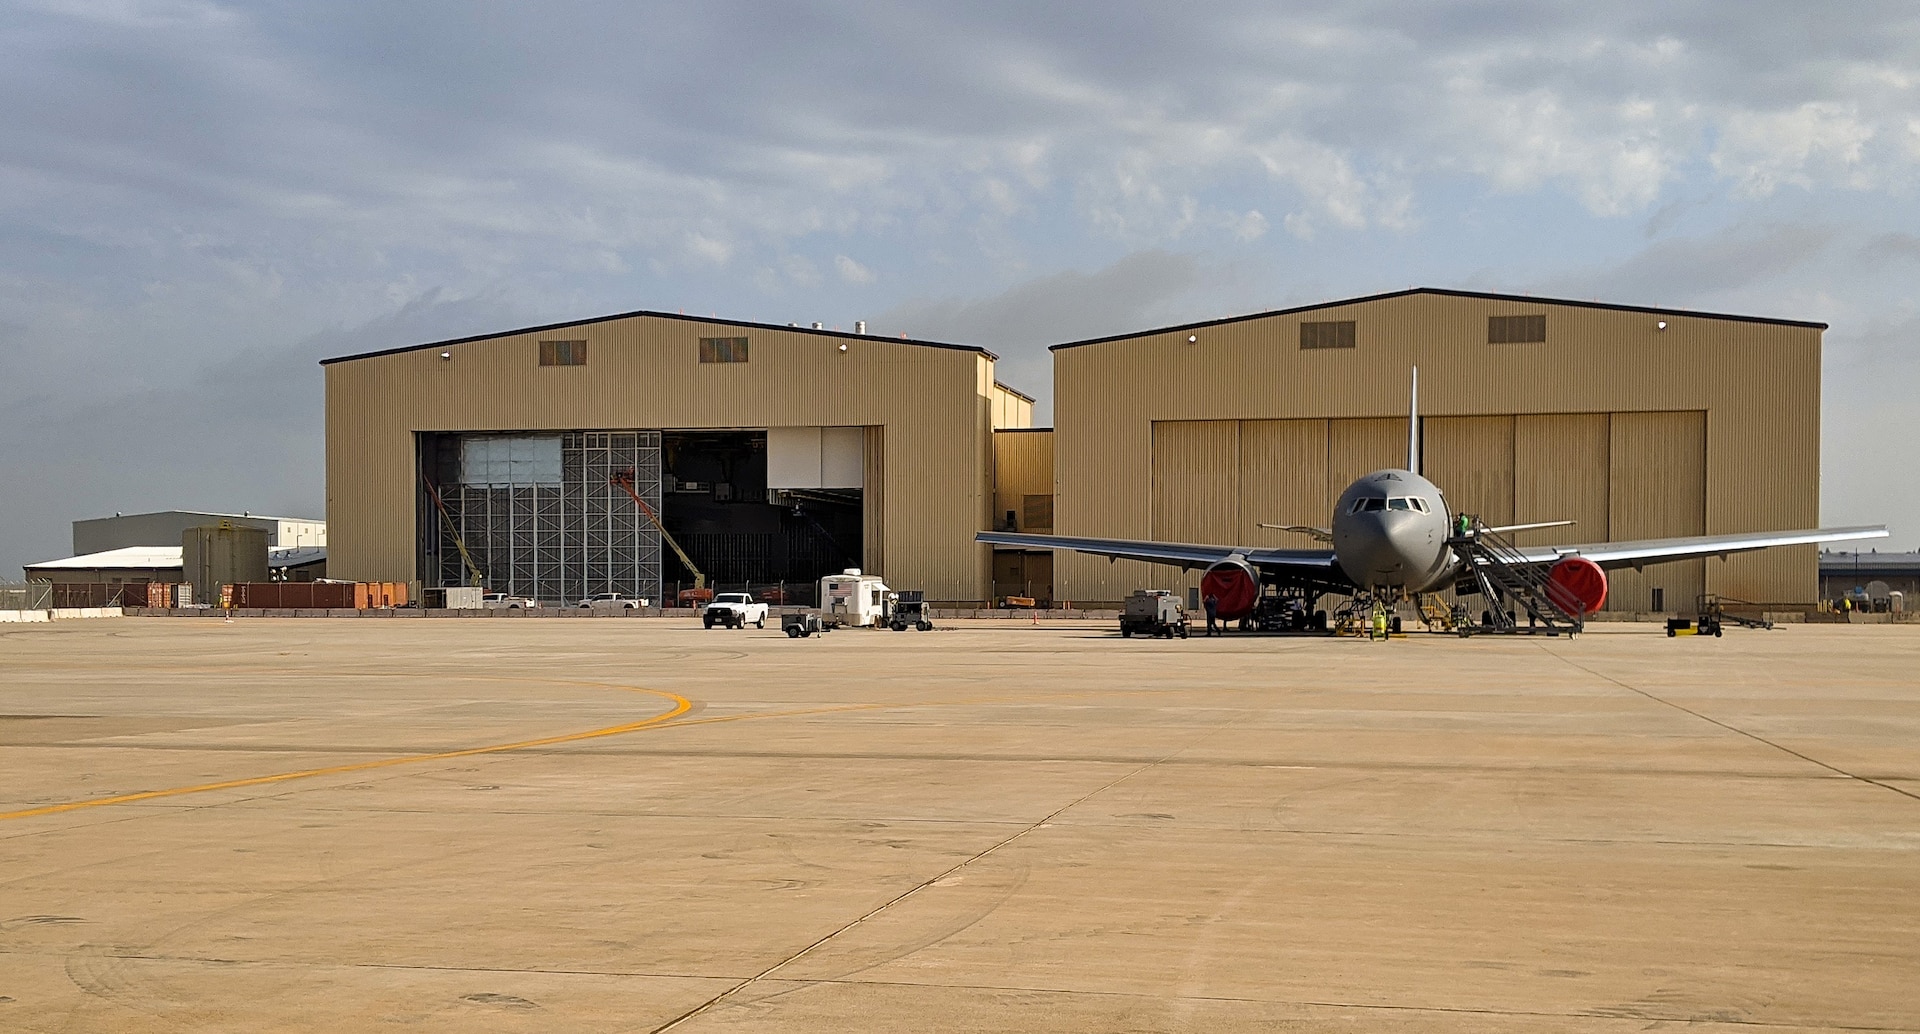 KC-46 corrosion control fuel hangar at Tinker Air Force Base, Oklahoma, a designated maintenance hub for the new refueling tanker. (U.S. Air Force photo)